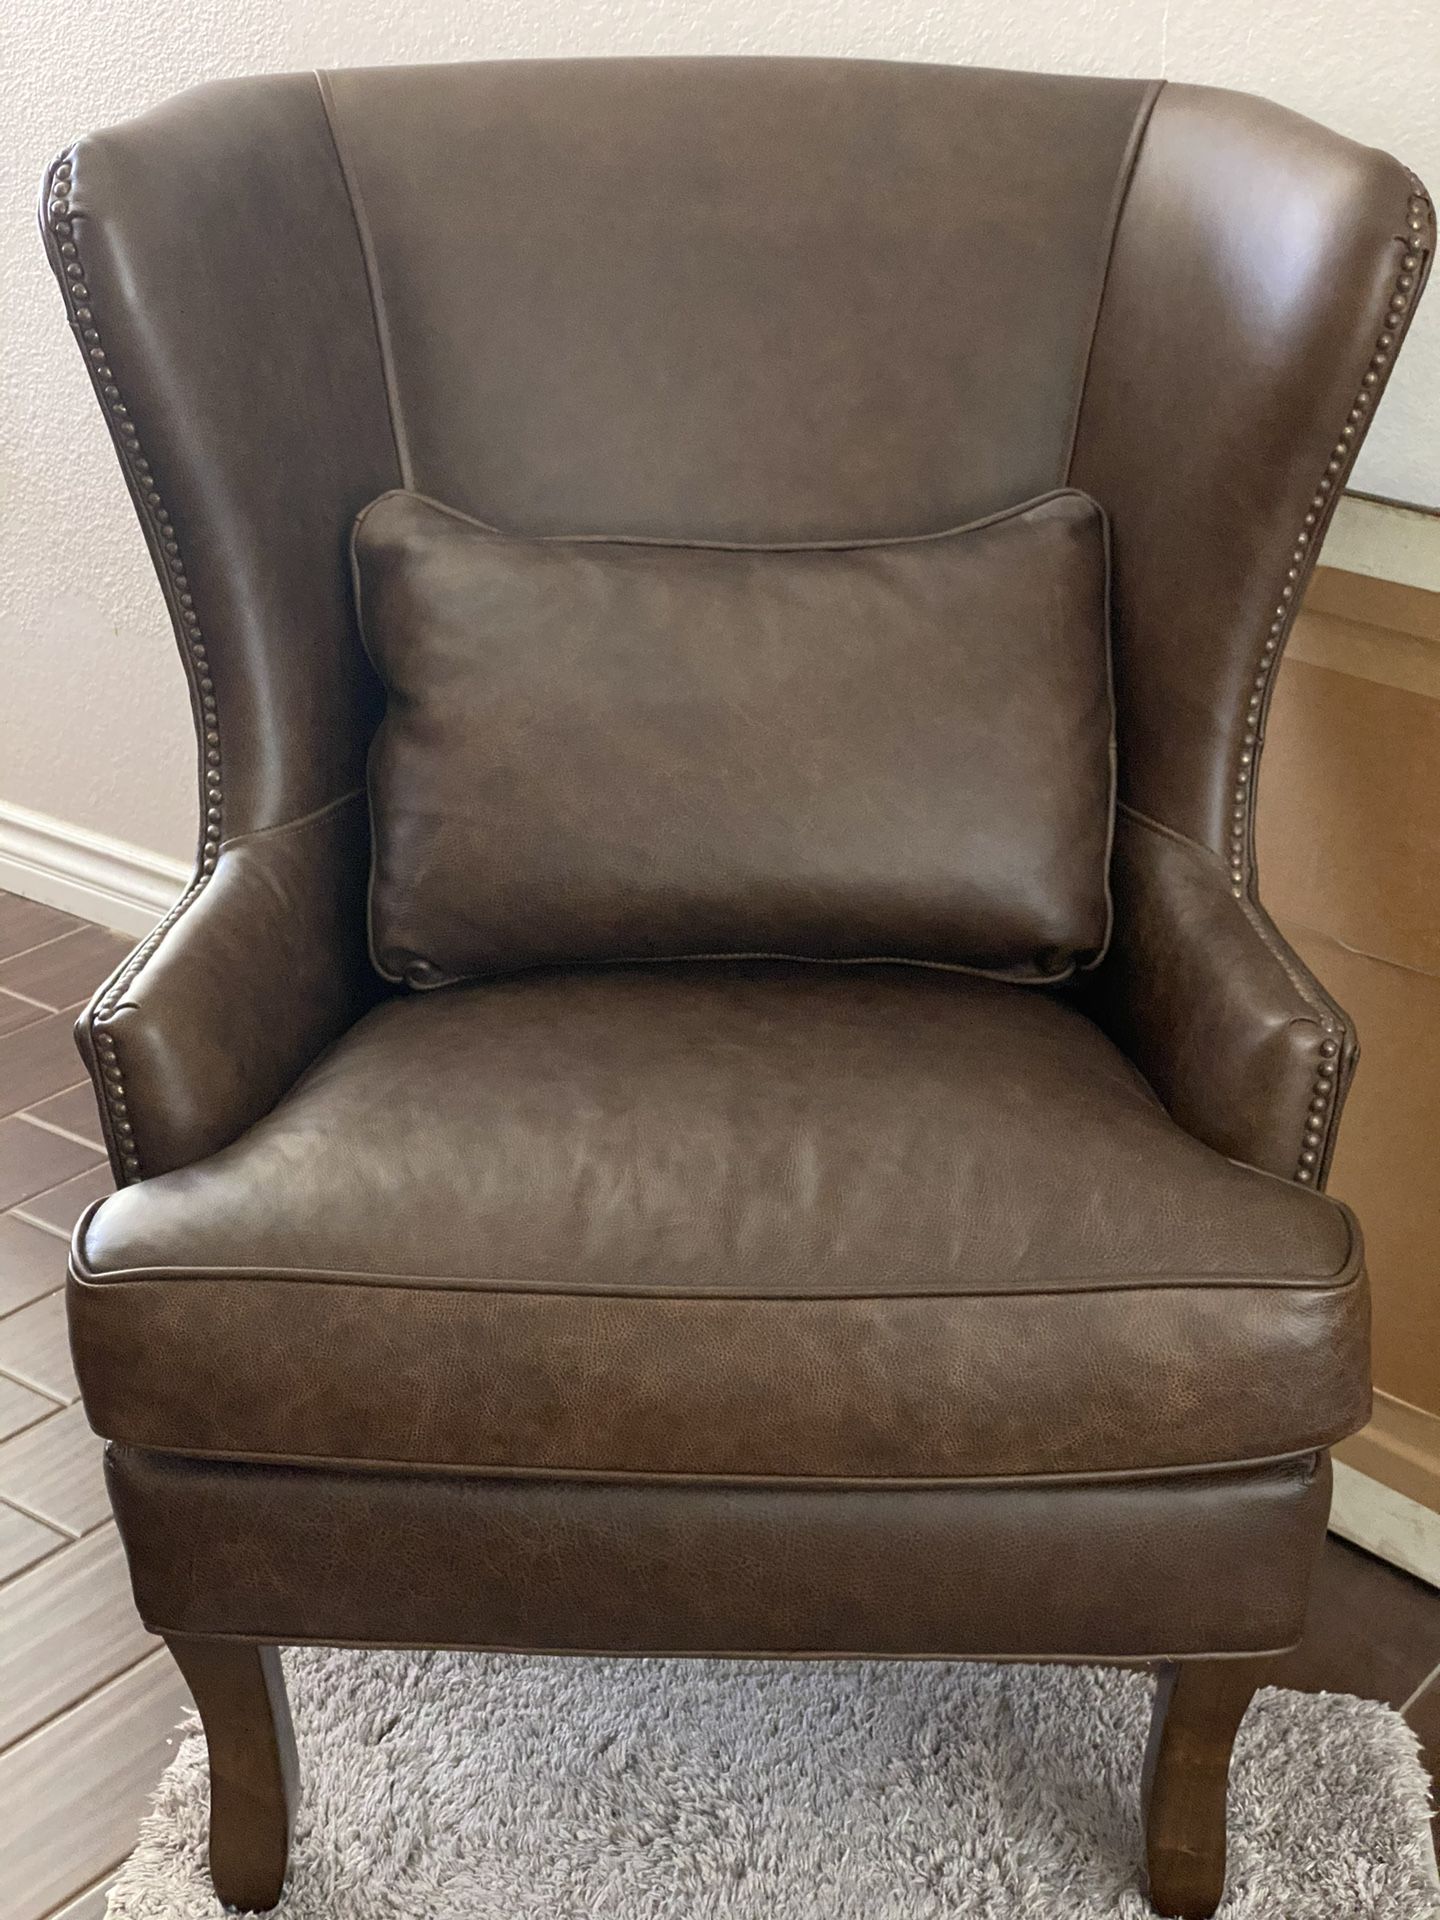 Wingback Accent Chair For Living Room Bedroom